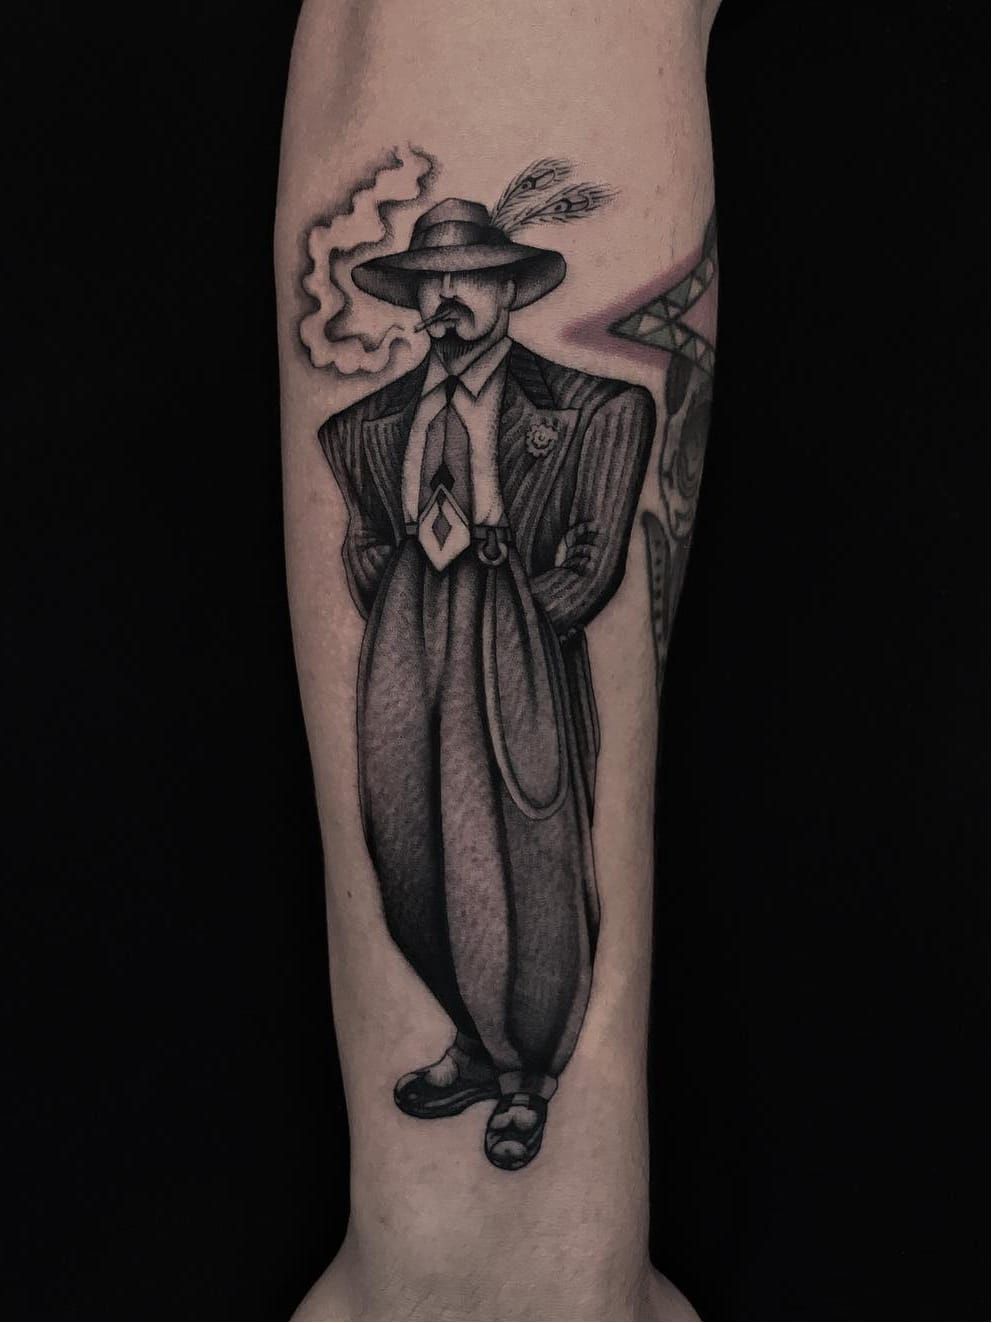 The Pachuco Cross by GothicFantasyGuild on DeviantArt